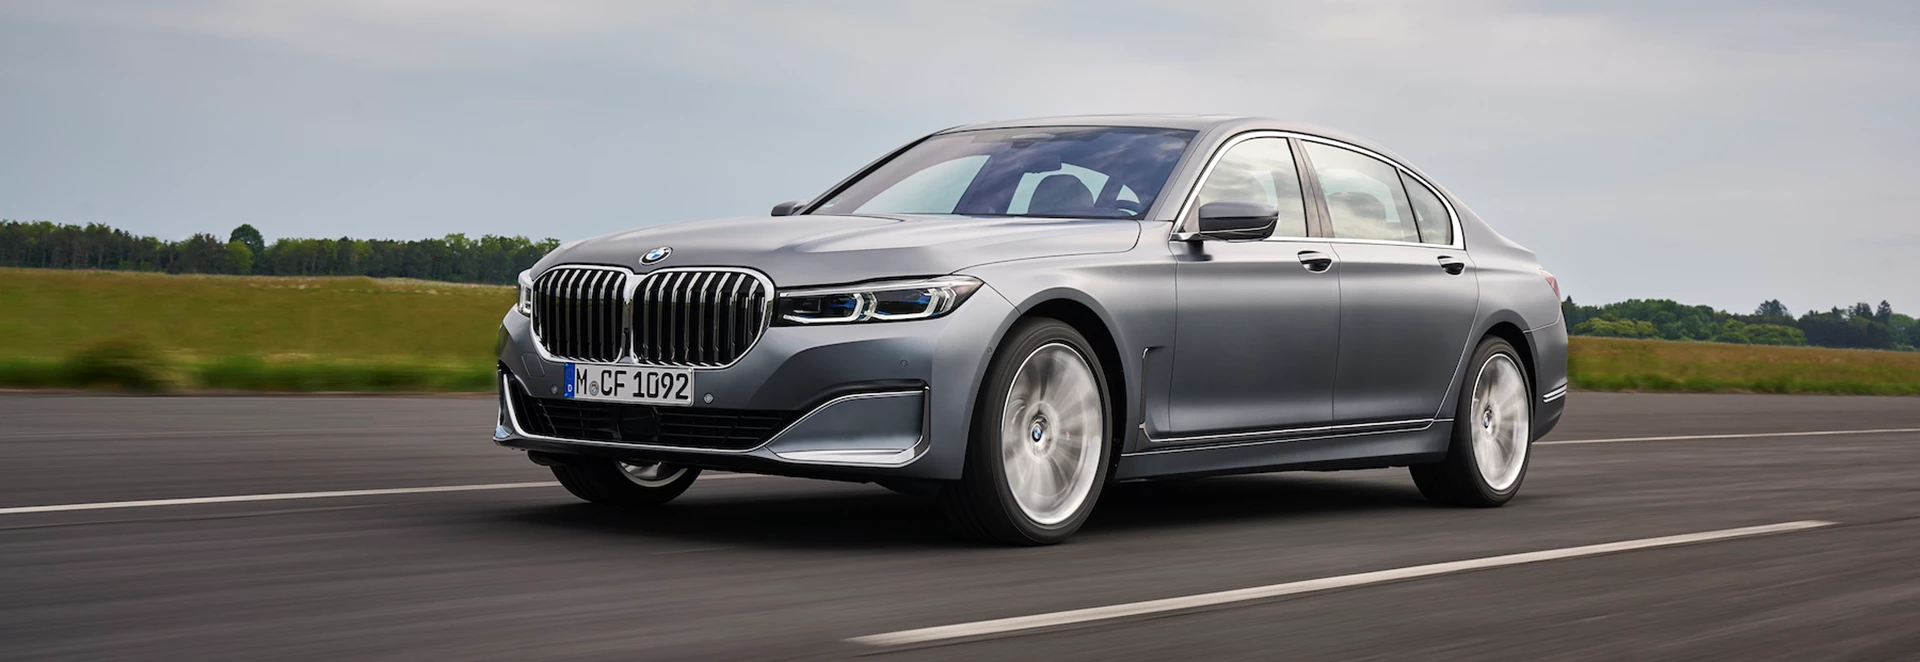 Flagship BMW 7 Series gains new more powerful and efficient engines 